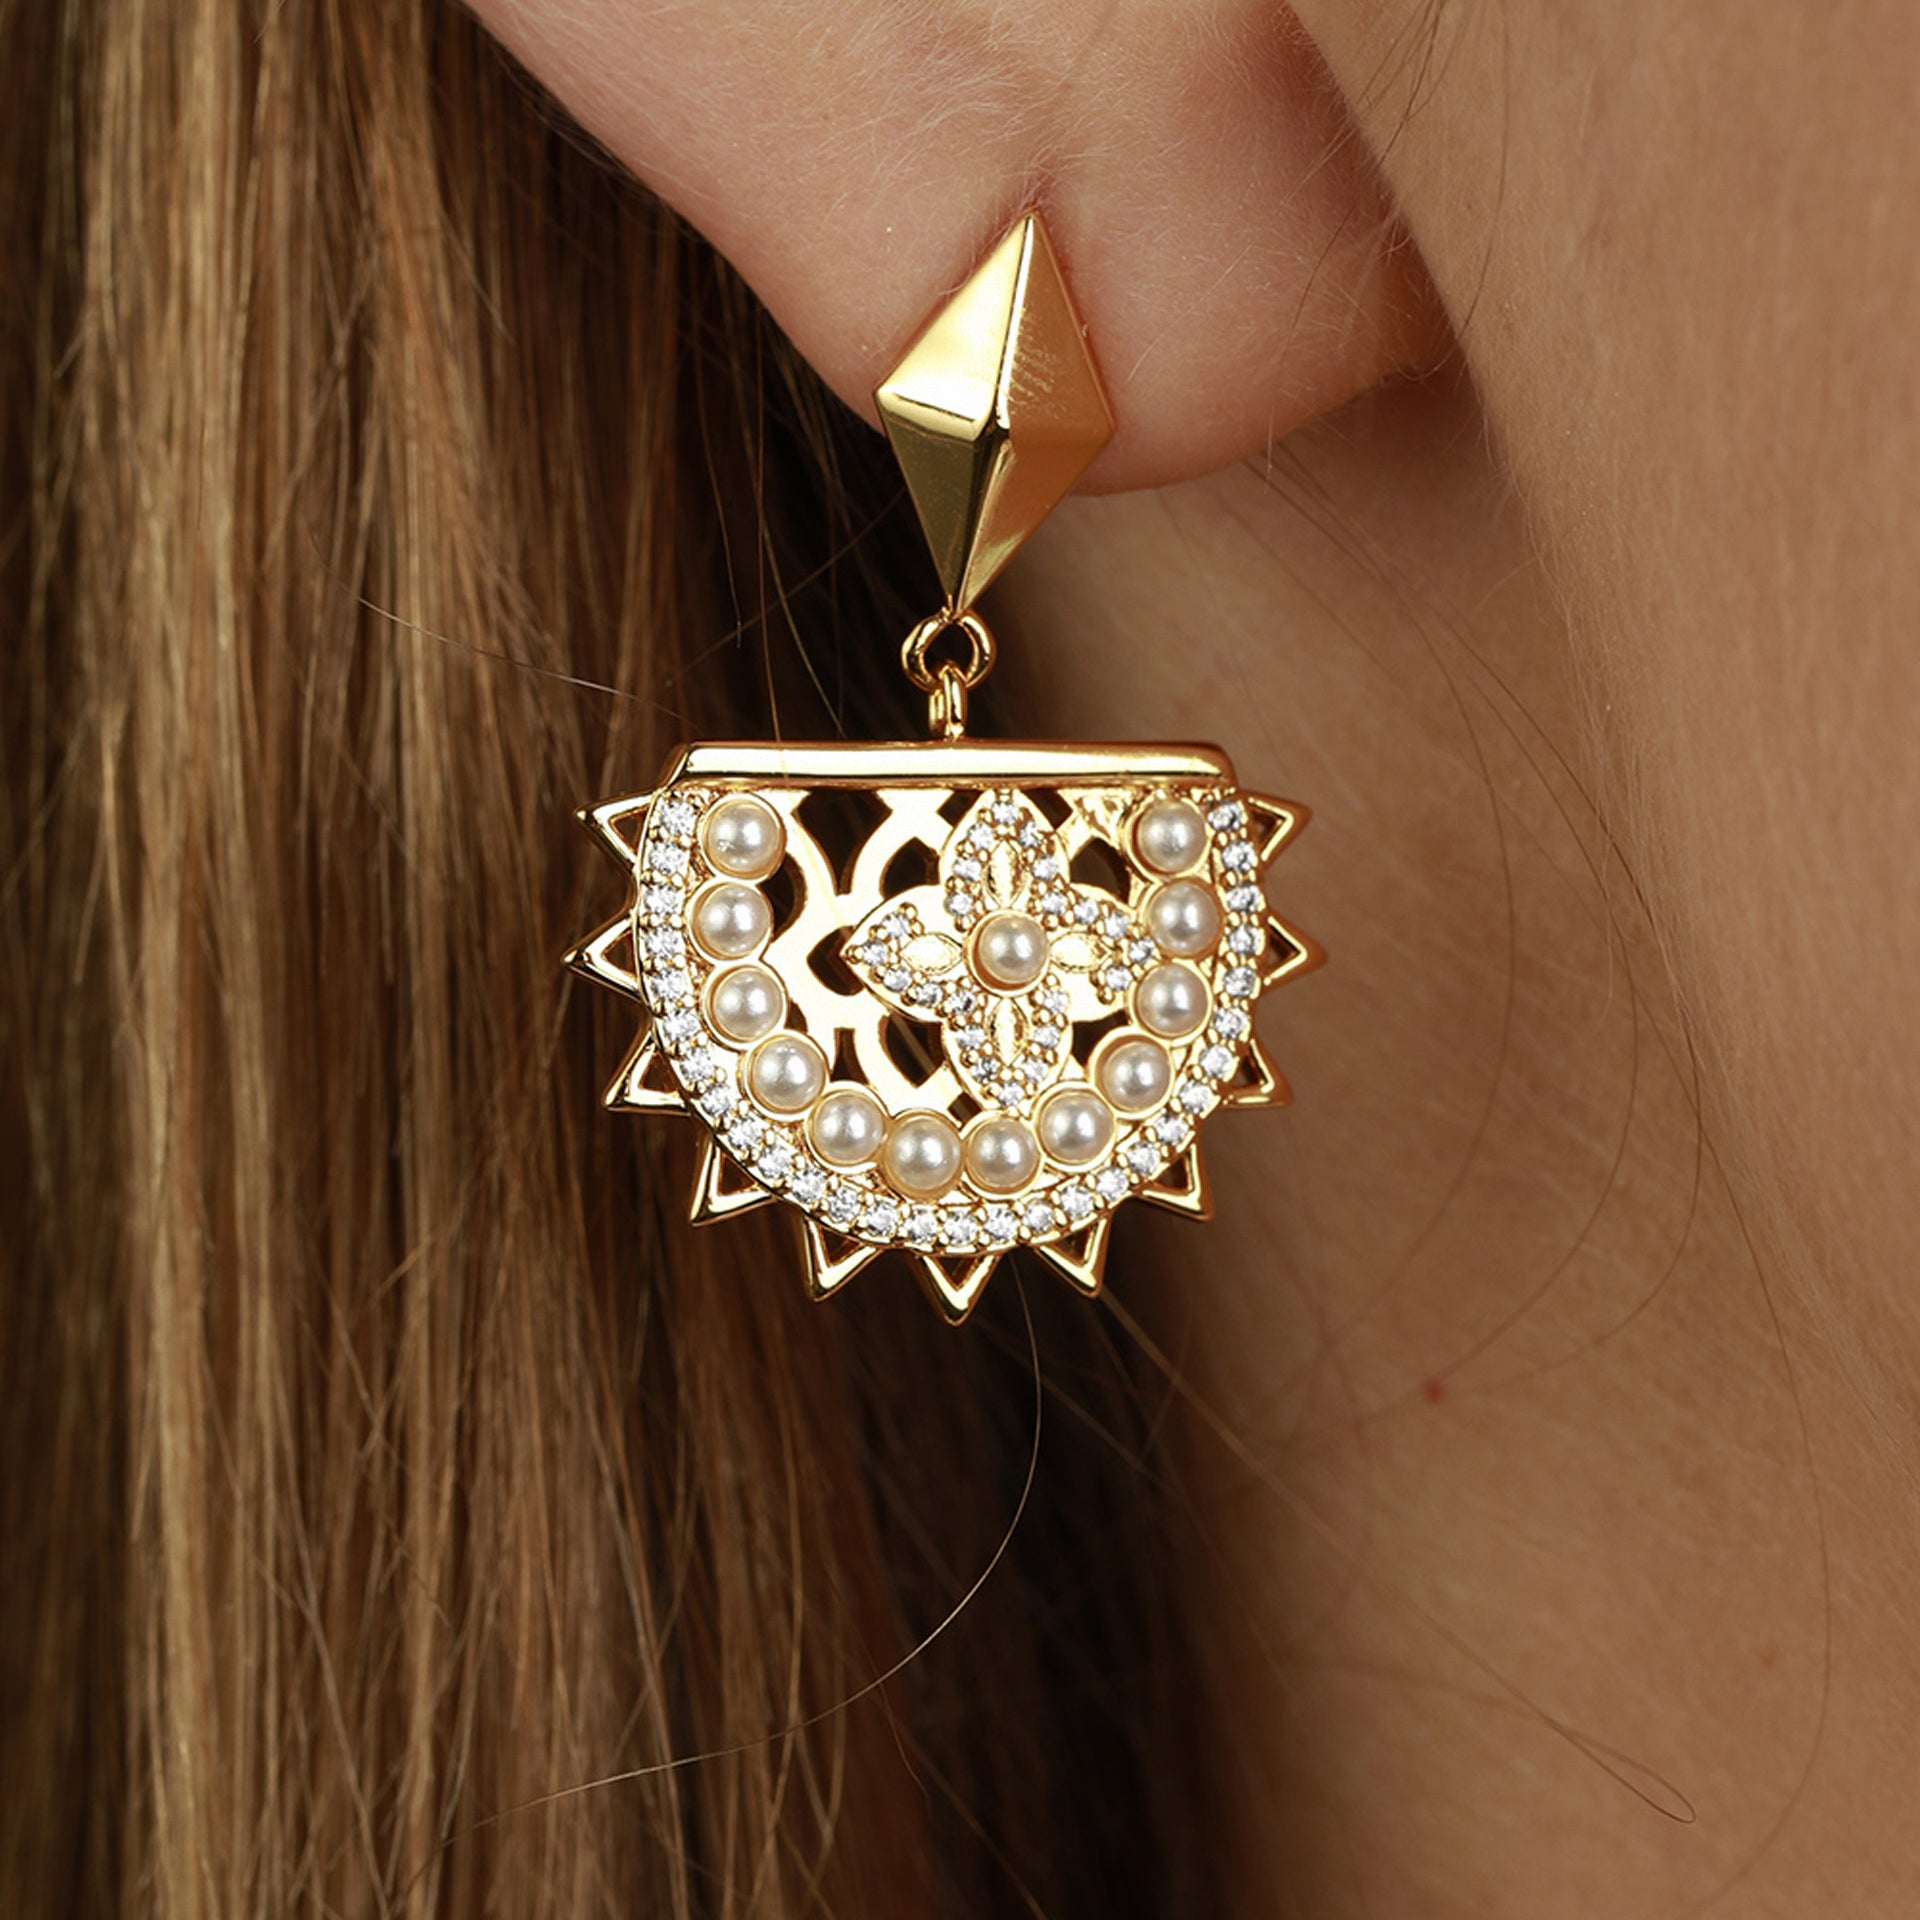 Asayel Gold Earrings From Le-Soleil